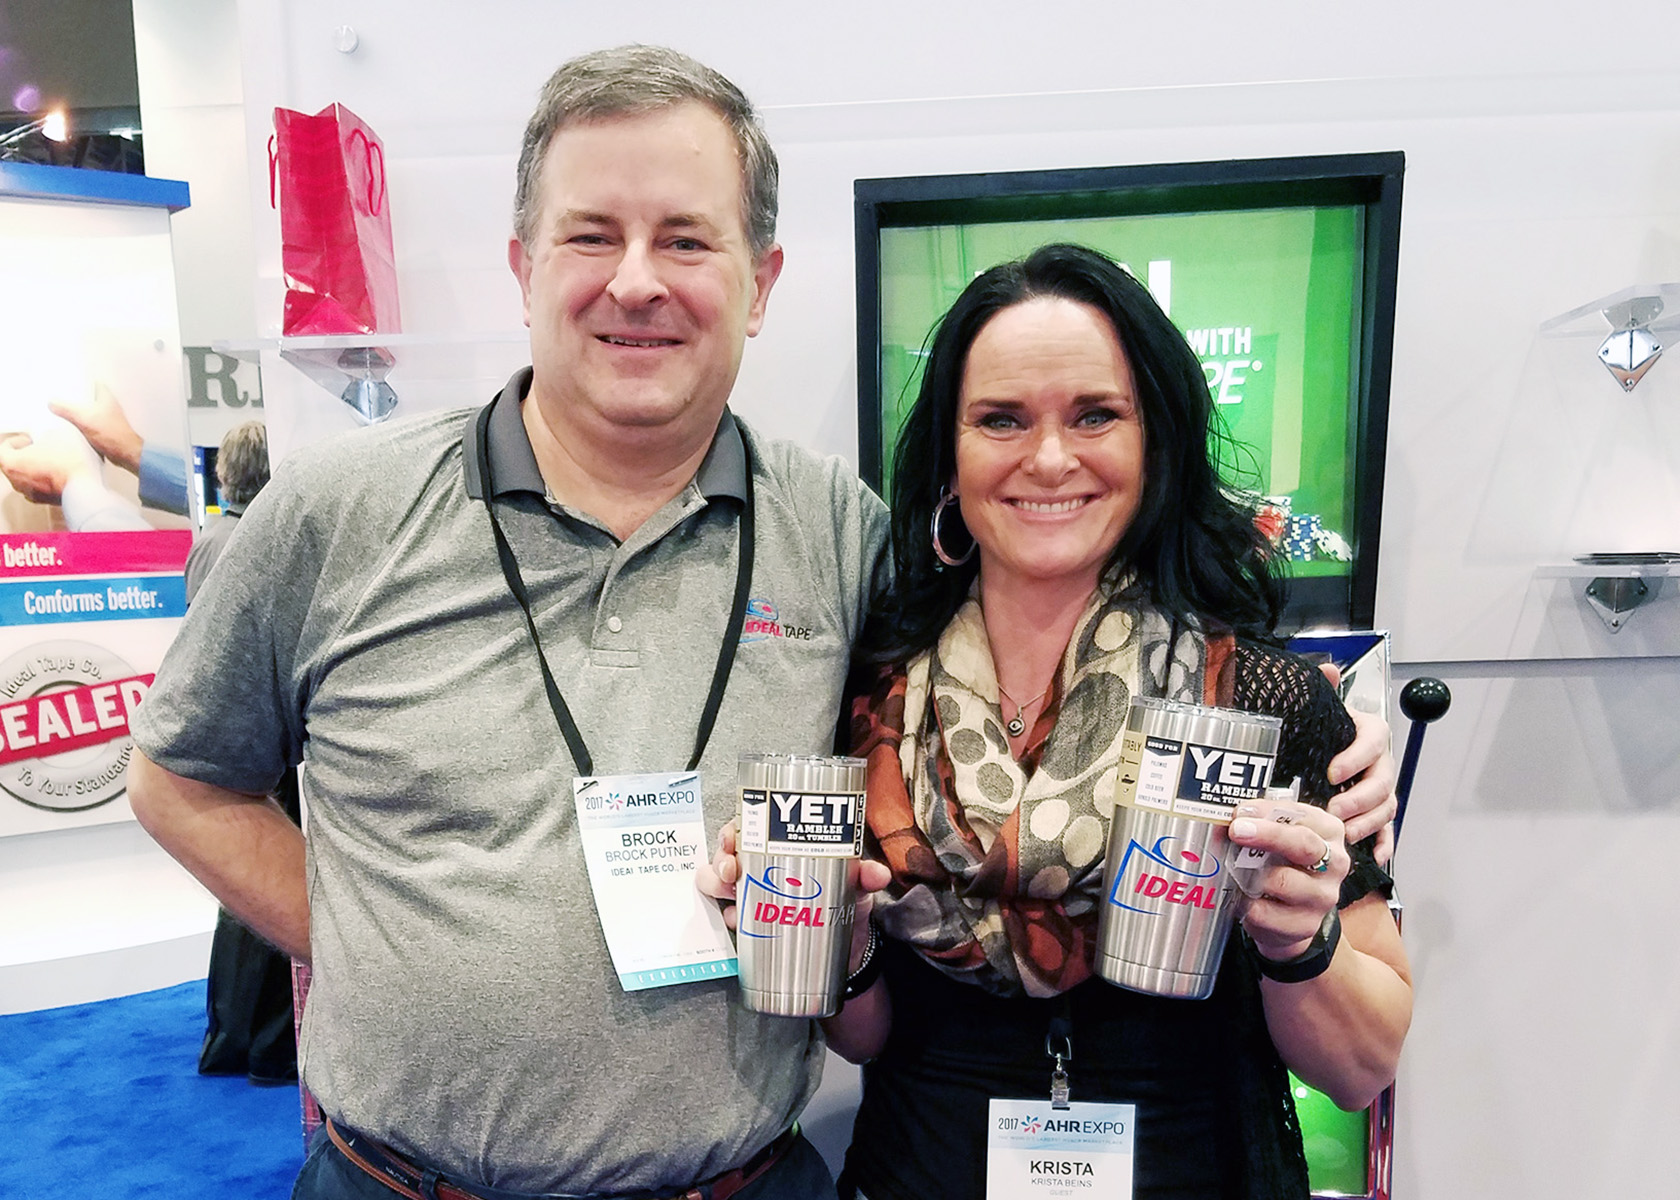 Krista Beins of Rocky Mountain Boiler, Inc. in Idaho Falls, ID walked away with two YETI 20 oz. Tumblers on Day 3 of the AHR Expo. (Pictured: Brock Putney, Krista Beins)